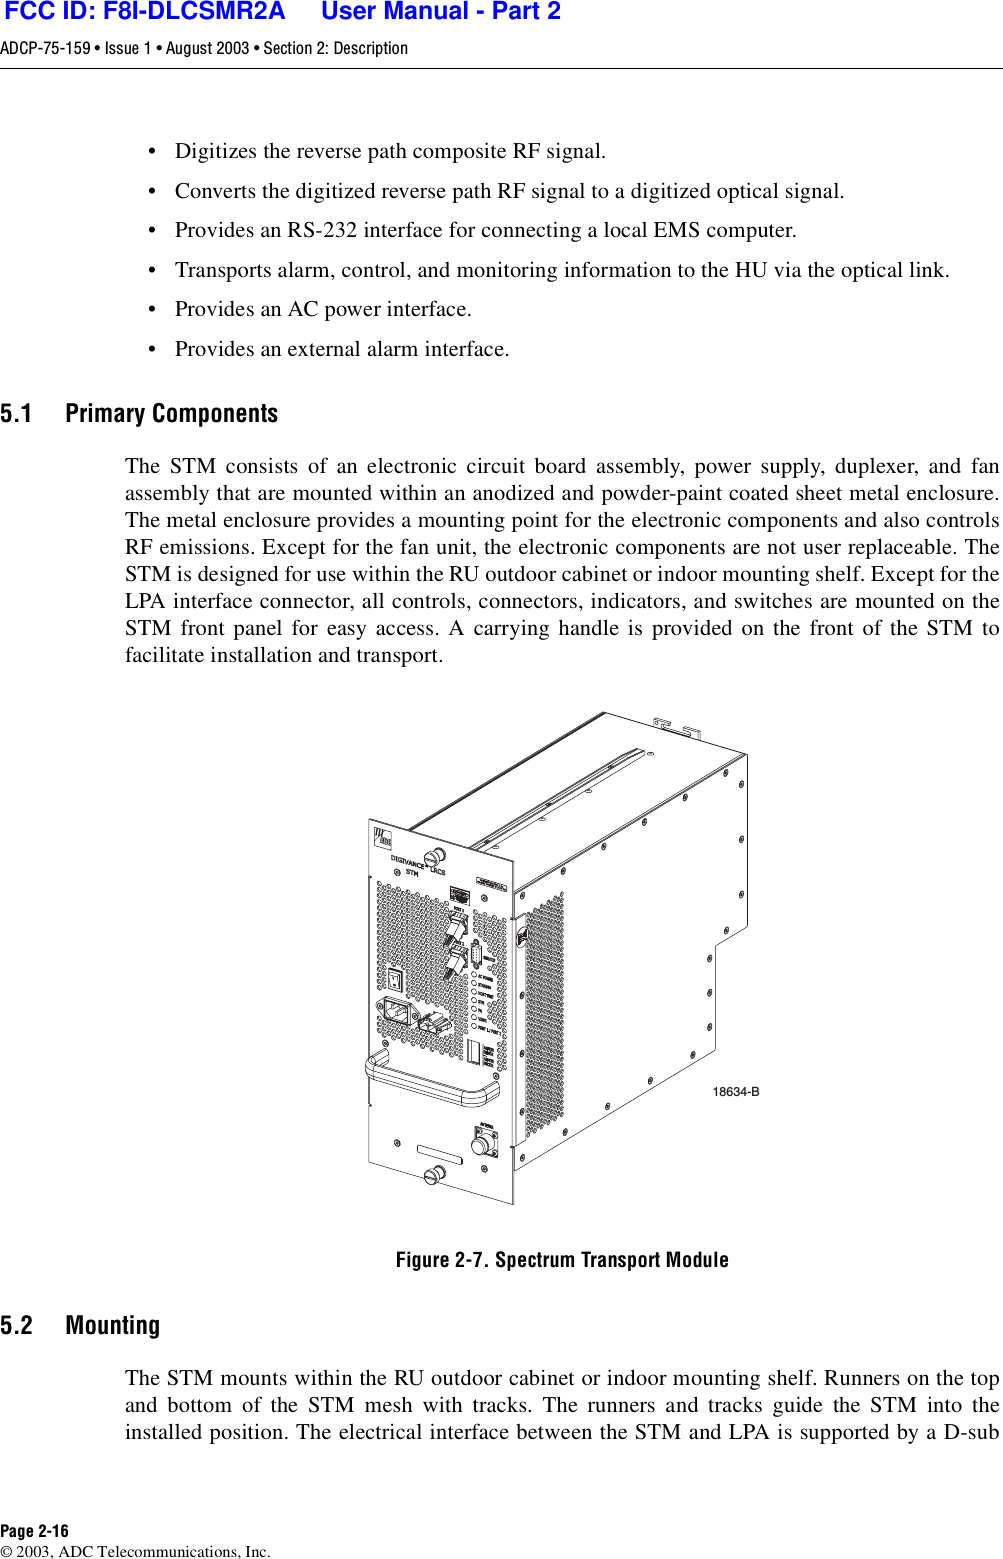 ADCP-75-159 • Issue 1 • August 2003 • Section 2: DescriptionPage 2-16© 2003, ADC Telecommunications, Inc.• Digitizes the reverse path composite RF signal. • Converts the digitized reverse path RF signal to a digitized optical signal. • Provides an RS-232 interface for connecting a local EMS computer. • Transports alarm, control, and monitoring information to the HU via the optical link. • Provides an AC power interface. • Provides an external alarm interface. 5.1 Primary ComponentsThe STM consists of an electronic circuit board assembly, power supply, duplexer, and fanassembly that are mounted within an anodized and powder-paint coated sheet metal enclosure.The metal enclosure provides a mounting point for the electronic components and also controlsRF emissions. Except for the fan unit, the electronic components are not user replaceable. TheSTM is designed for use within the RU outdoor cabinet or indoor mounting shelf. Except for theLPA interface connector, all controls, connectors, indicators, and switches are mounted on theSTM front panel for easy access. A carrying handle is provided on the front of the STM tofacilitate installation and transport. Figure 2-7. Spectrum Transport Module5.2 MountingThe STM mounts within the RU outdoor cabinet or indoor mounting shelf. Runners on the topand bottom of the STM mesh with tracks. The runners and tracks guide the STM into theinstalled position. The electrical interface between the STM and LPA is supported by a D-sub18634-BFCC ID: F8I-DLCSMR2A     User Manual - Part 2